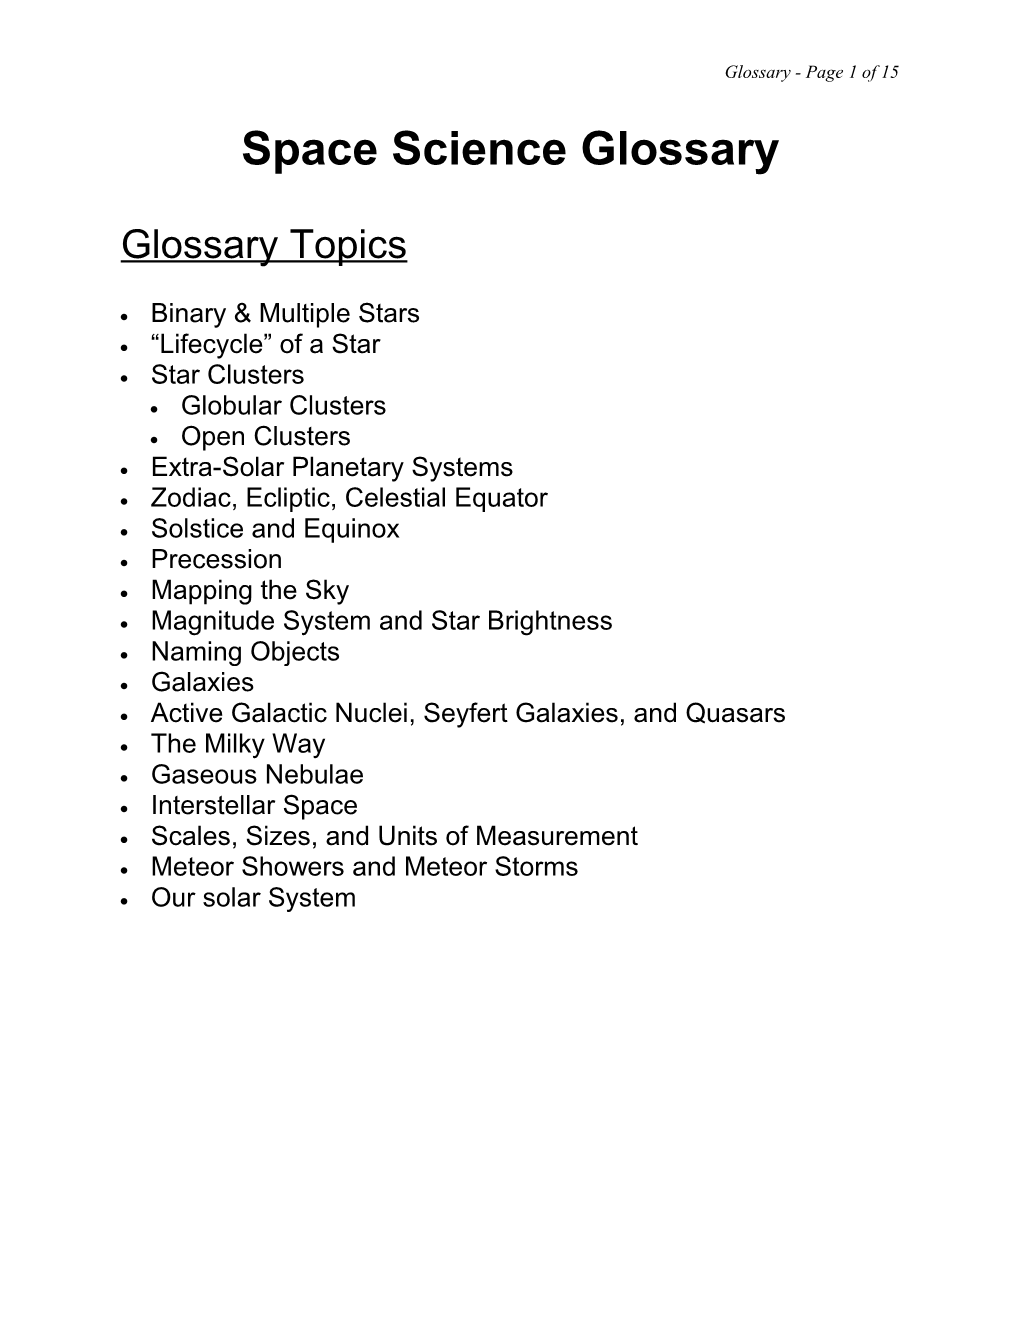 Glossary for Astronomy Readings